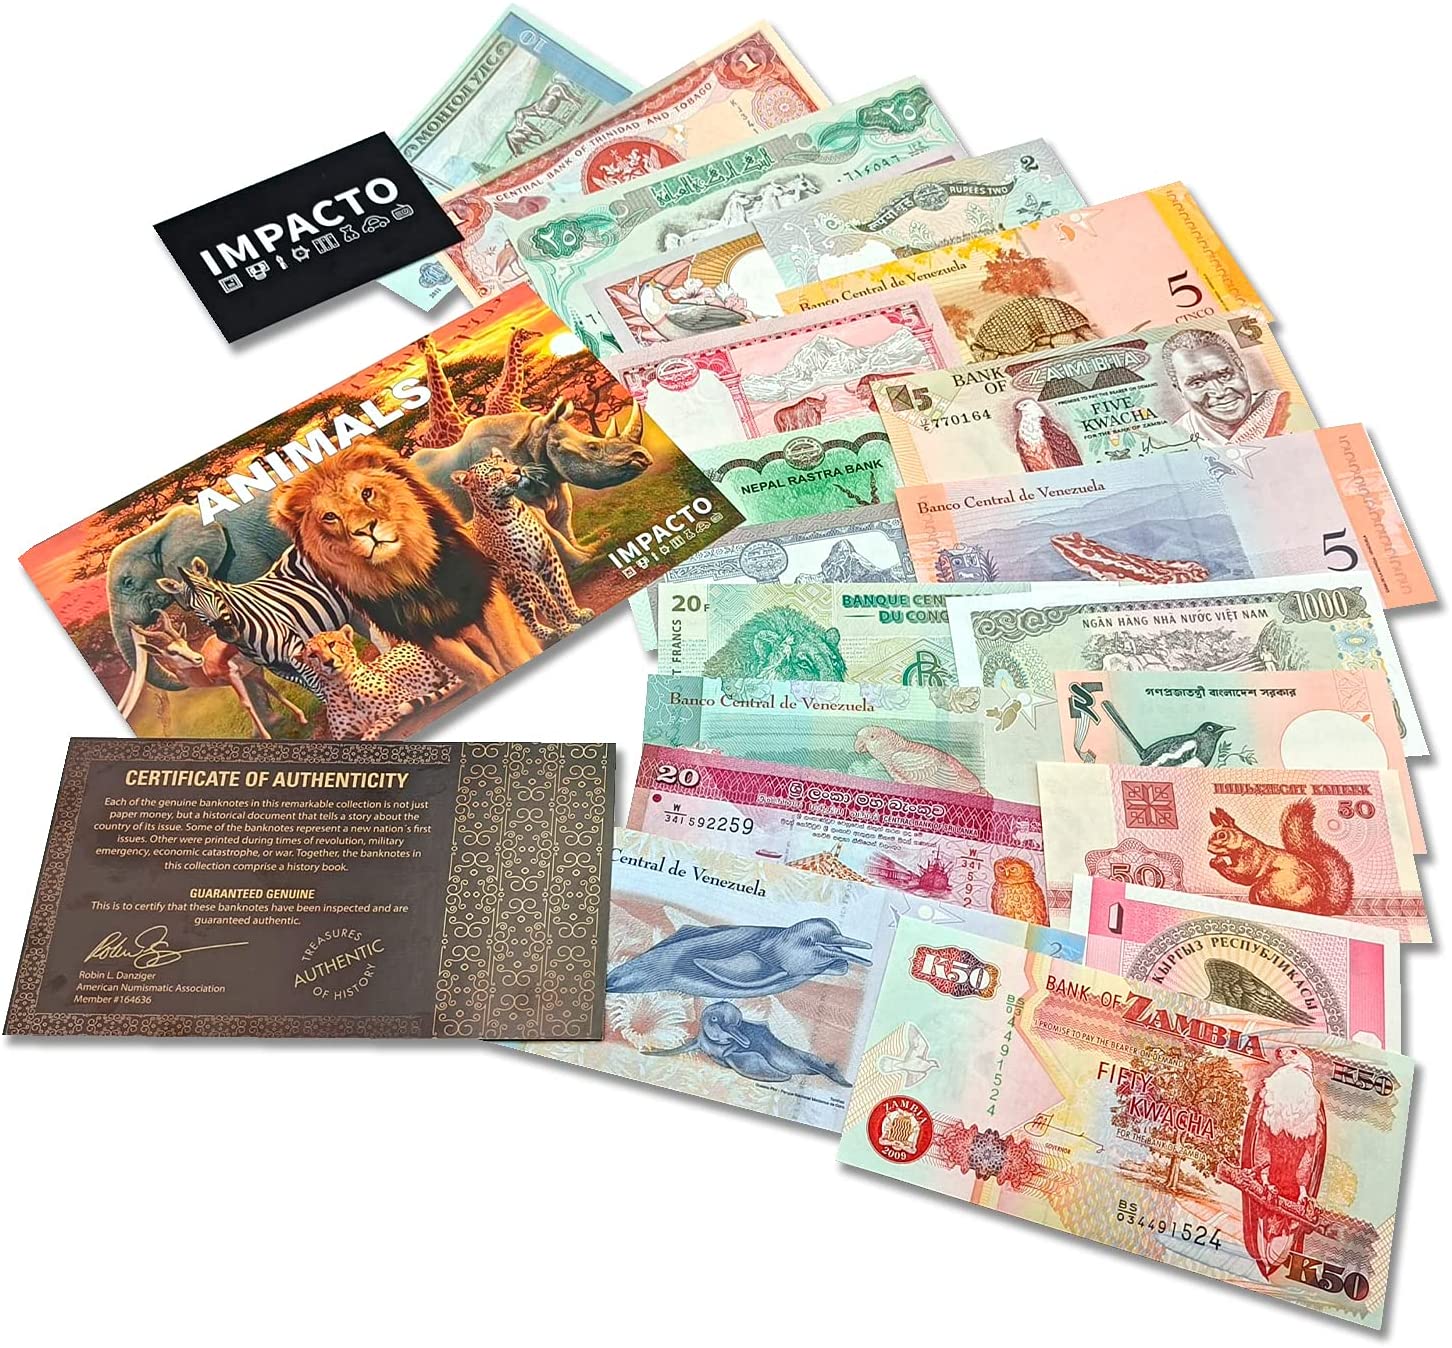 IMPACTO COLECCIONABLES Coin Collection - World Currency Treasure Chest with  2Lb. - Collectible Circulated Coins - 4.7 x 3.5 x 3.5 Decorative Wooden